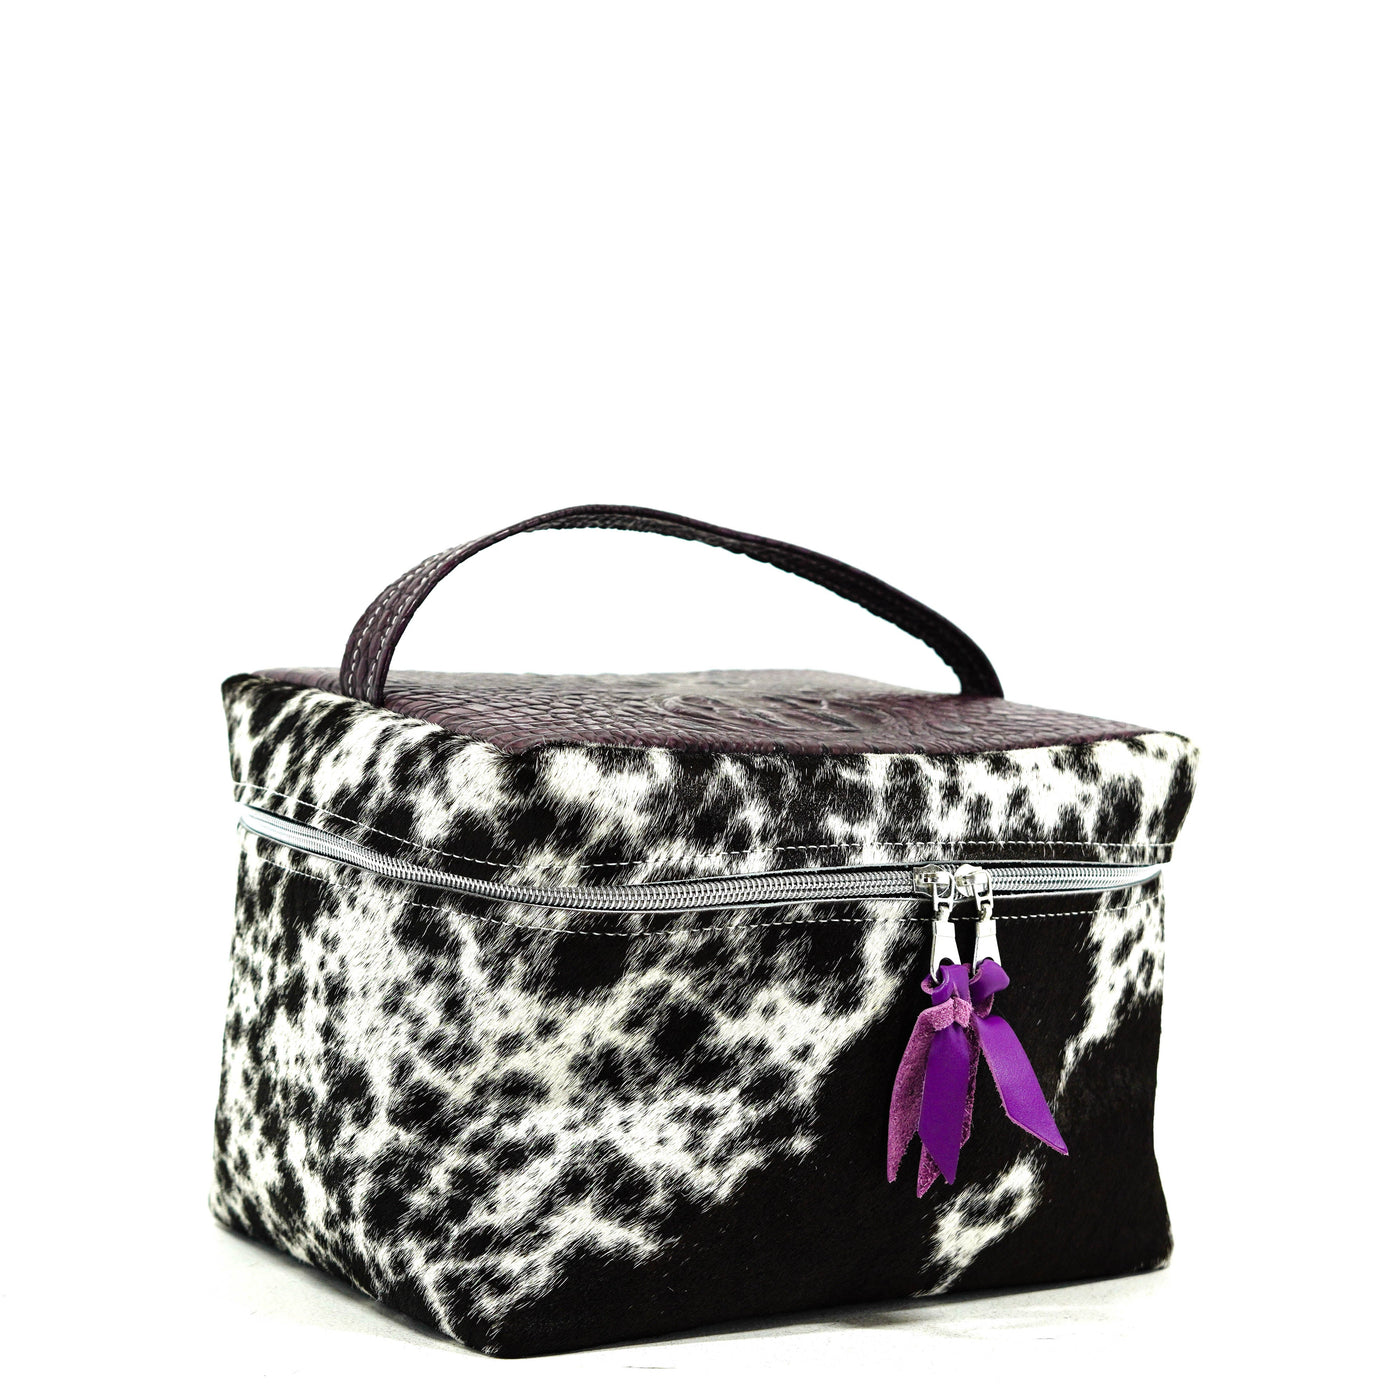 Train Station - Black & White w/ Amethyst Croc-Train Station-Western-Cowhide-Bags-Handmade-Products-Gifts-Dancing Cactus Designs